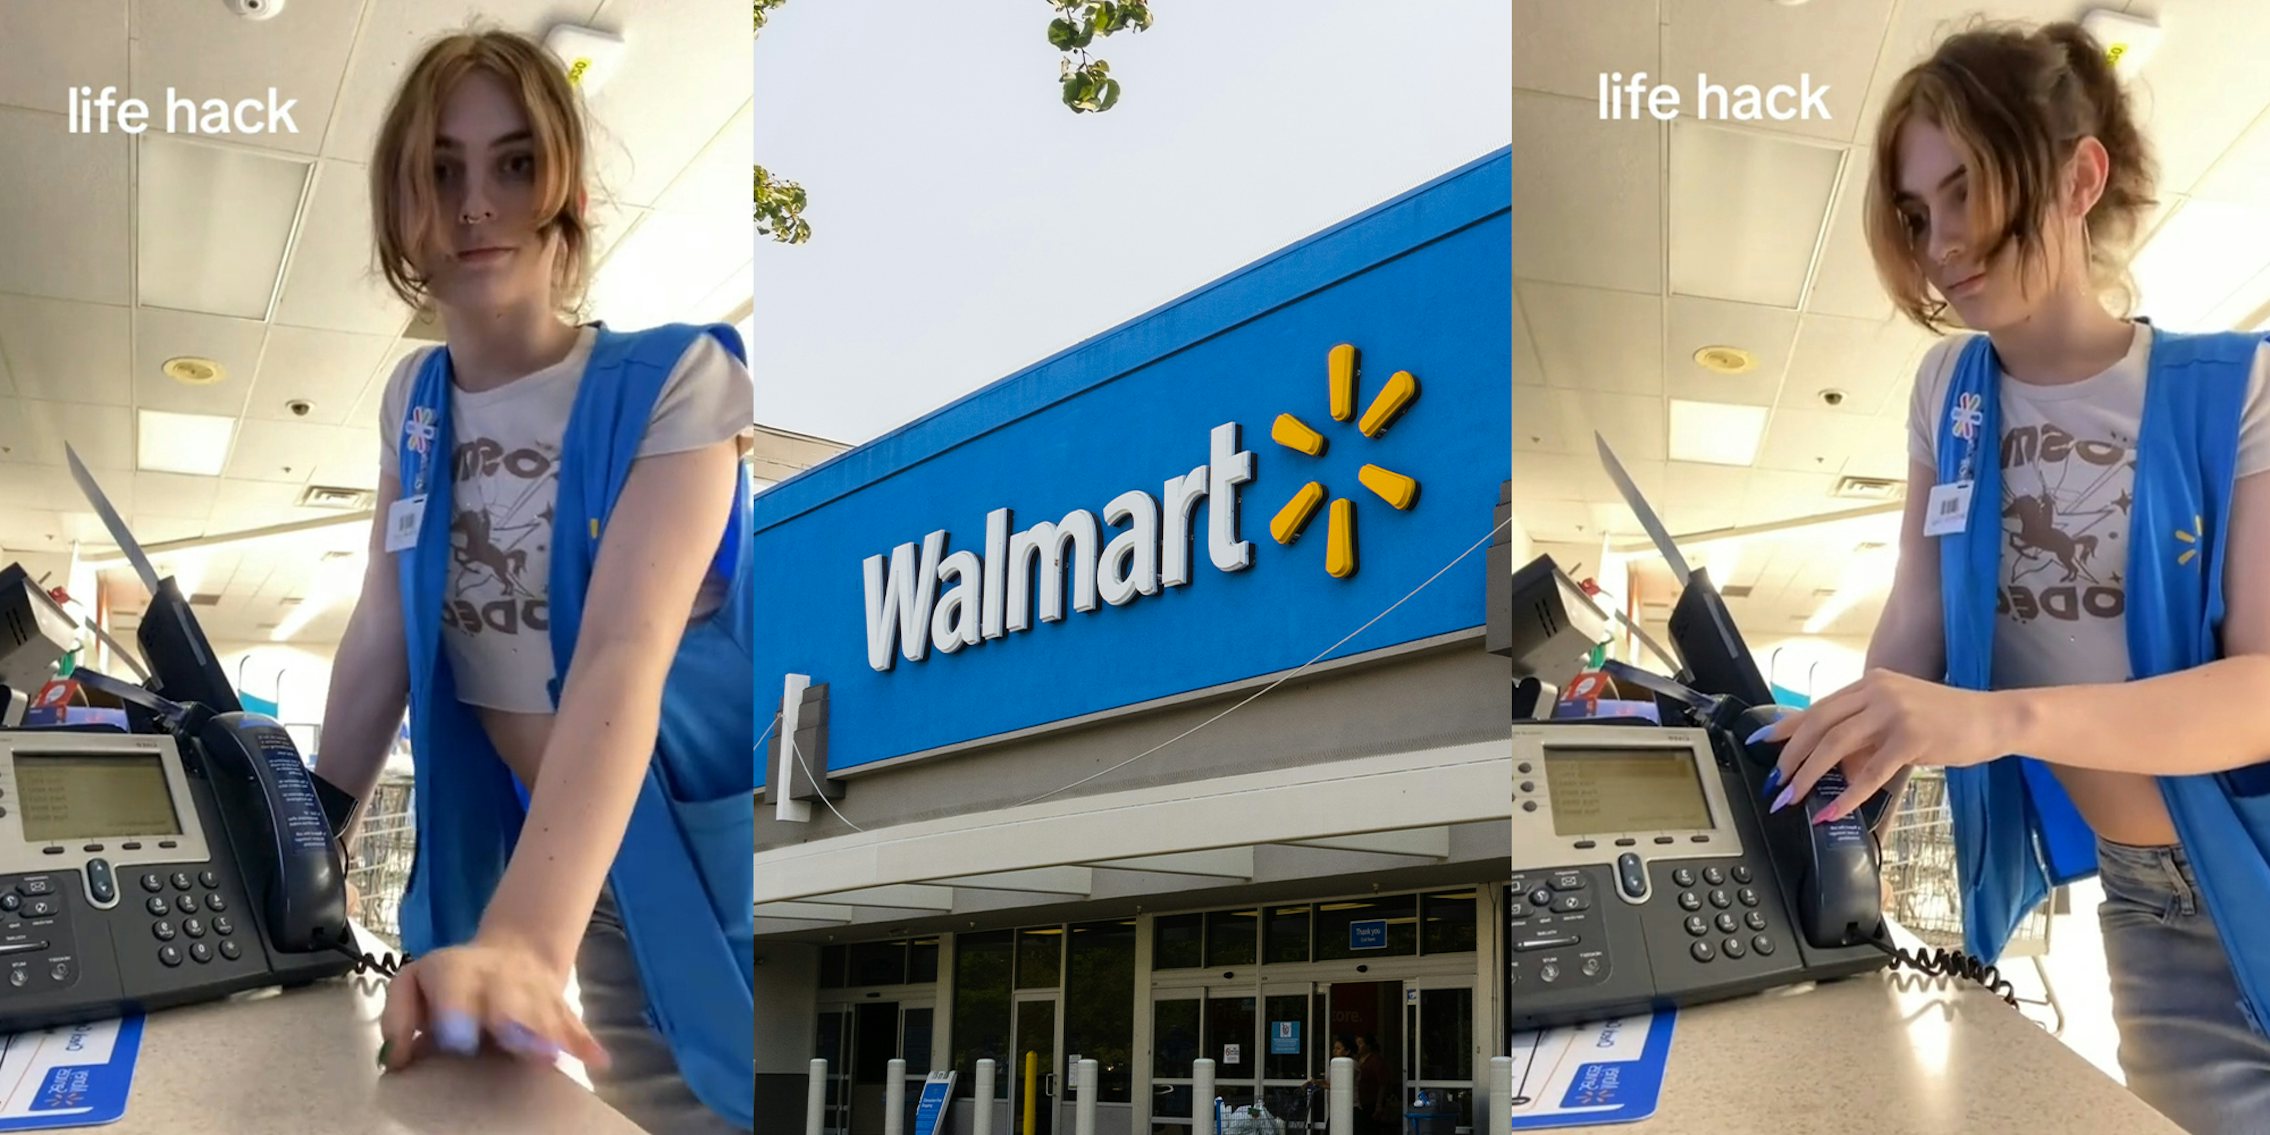 Walmart worker who hangs up incoming call instead of answering in 'life hack'